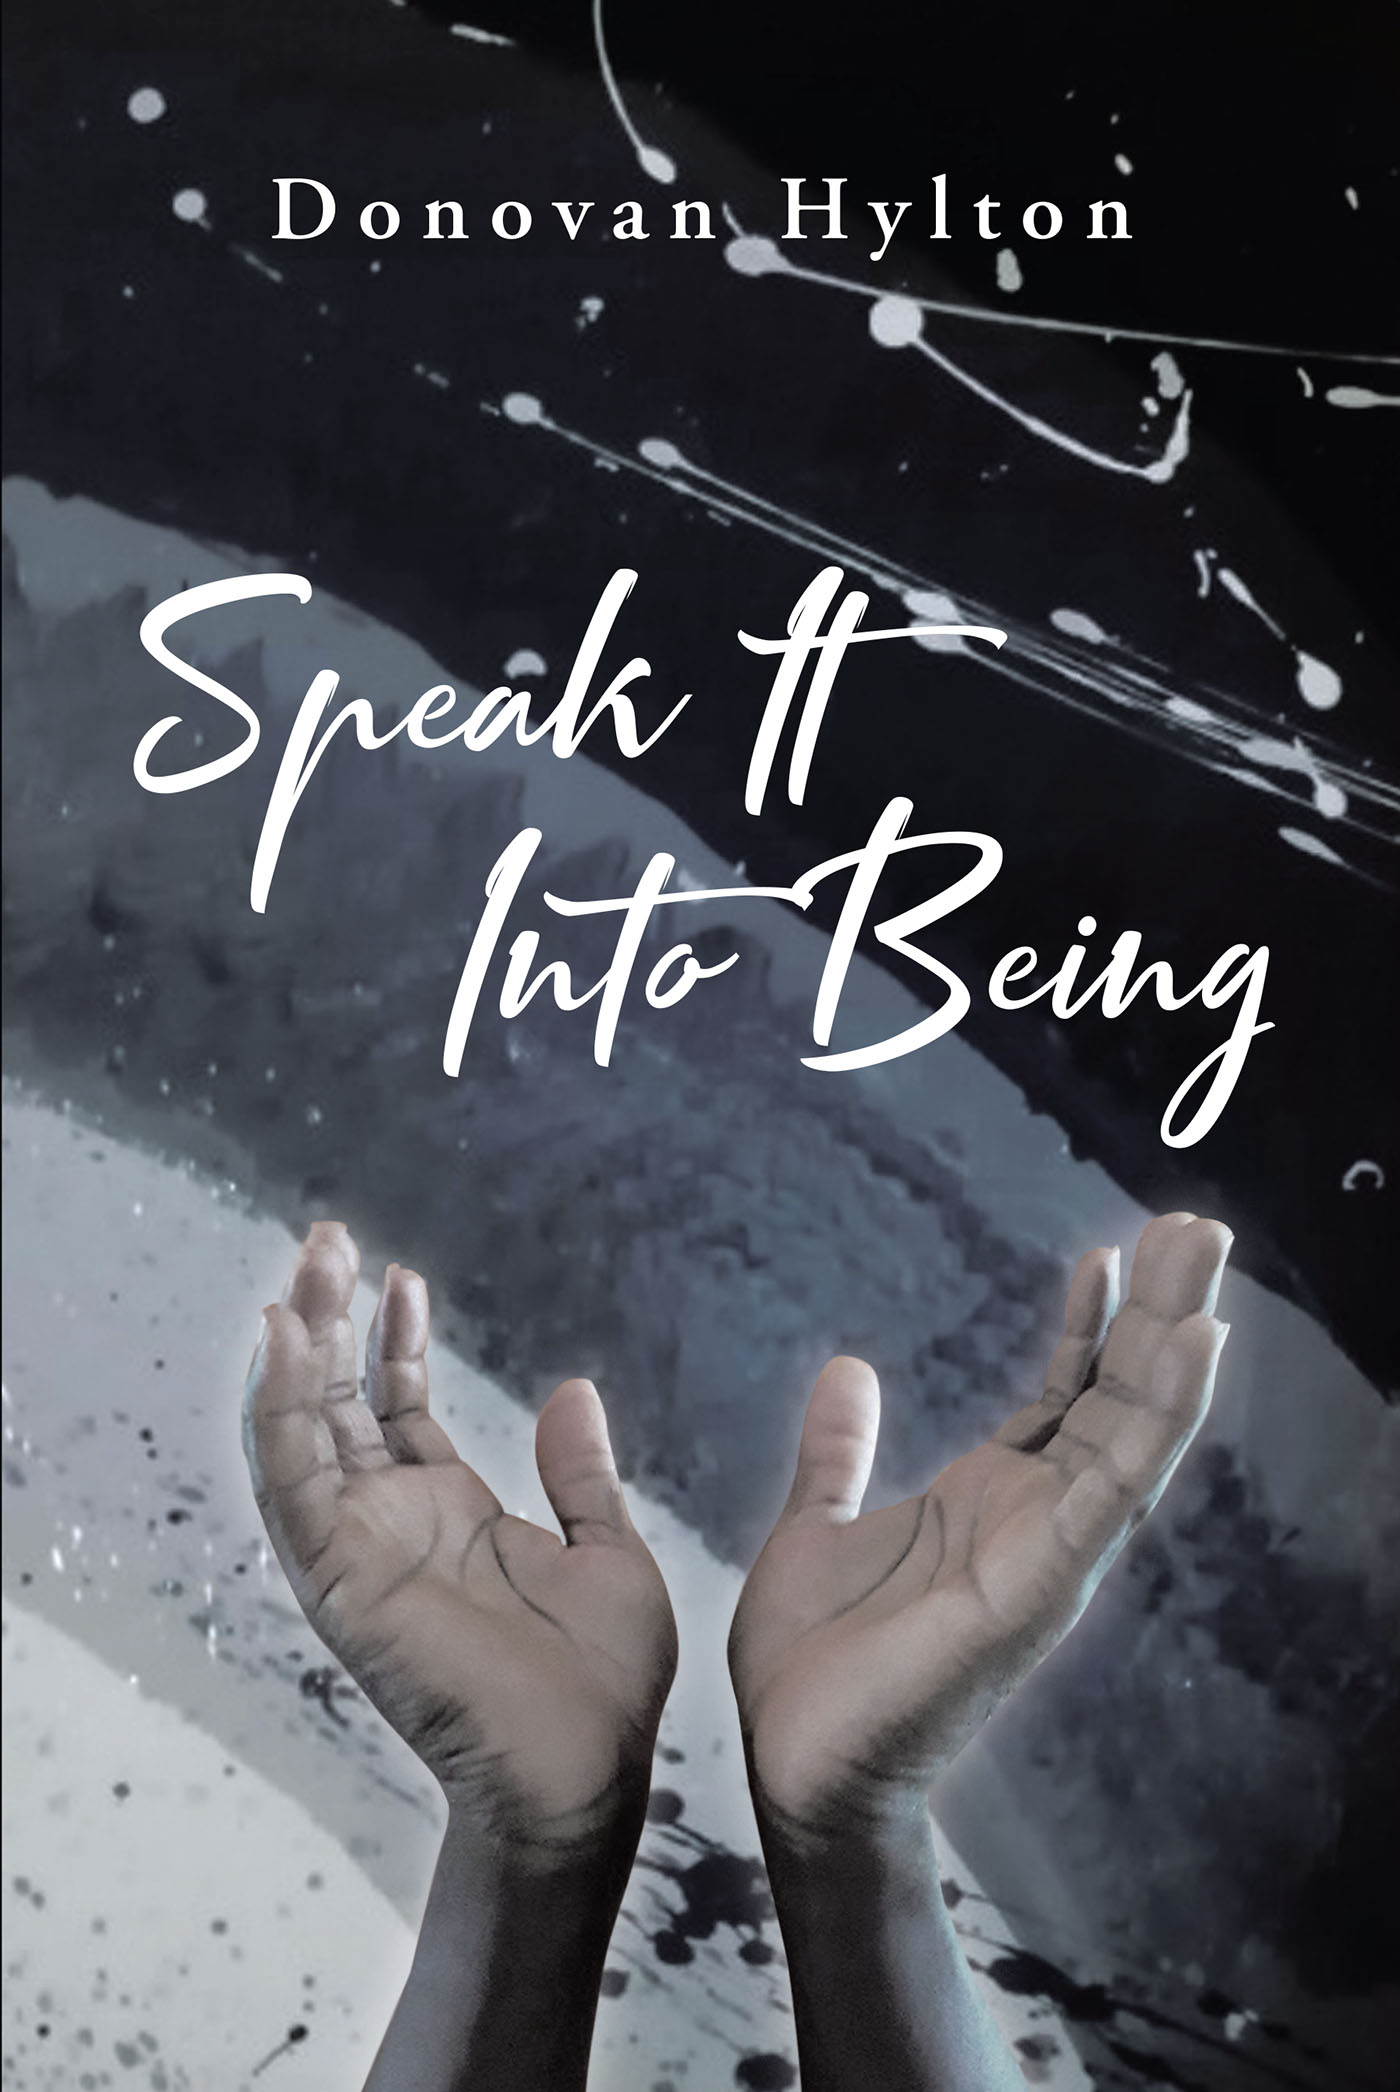 Donovan Hylton’s New Book, “Speak It Into Being,” is the Fascinating Tale of a Cancer-Stricken Man Who is Miraculously Healed After Coming Into Contact with a Zone of God